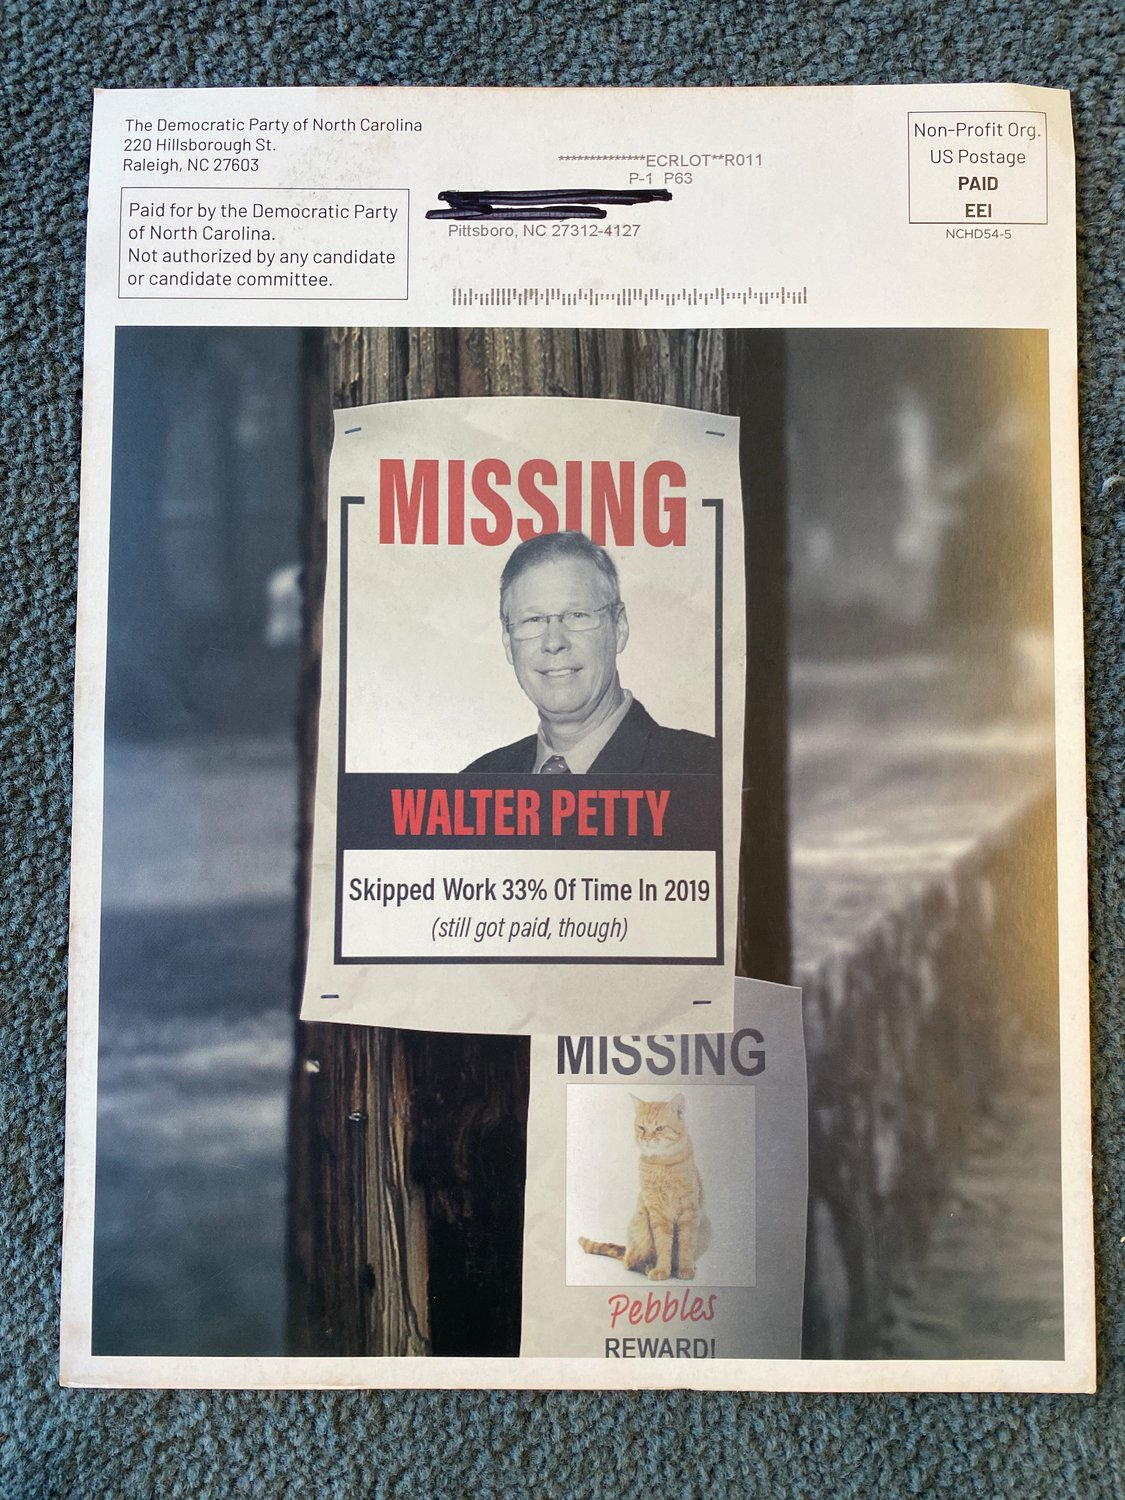 A political mailer sent to Dist. 54 voters by the Democratic Party of N.C. attacking Walter Petty.